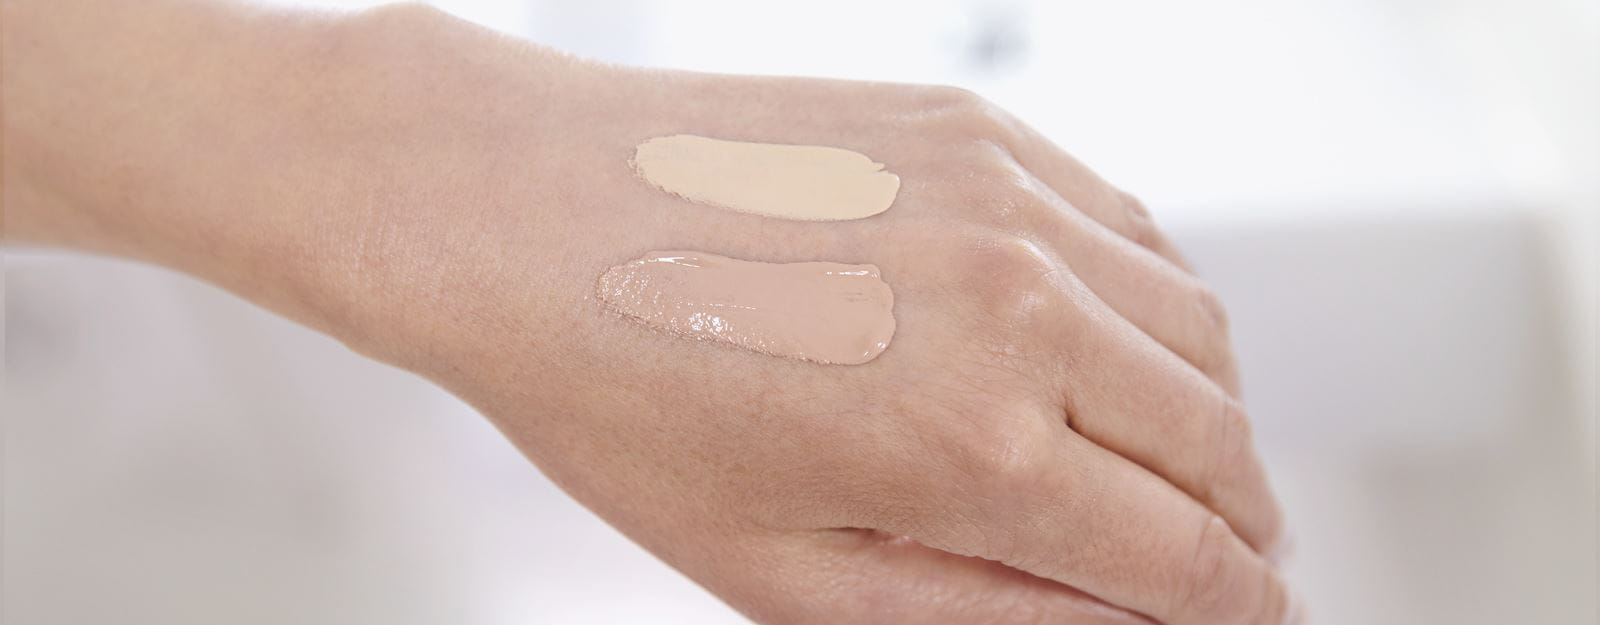 BB Cream or CC Cream: Which Is Right for Your Skin?